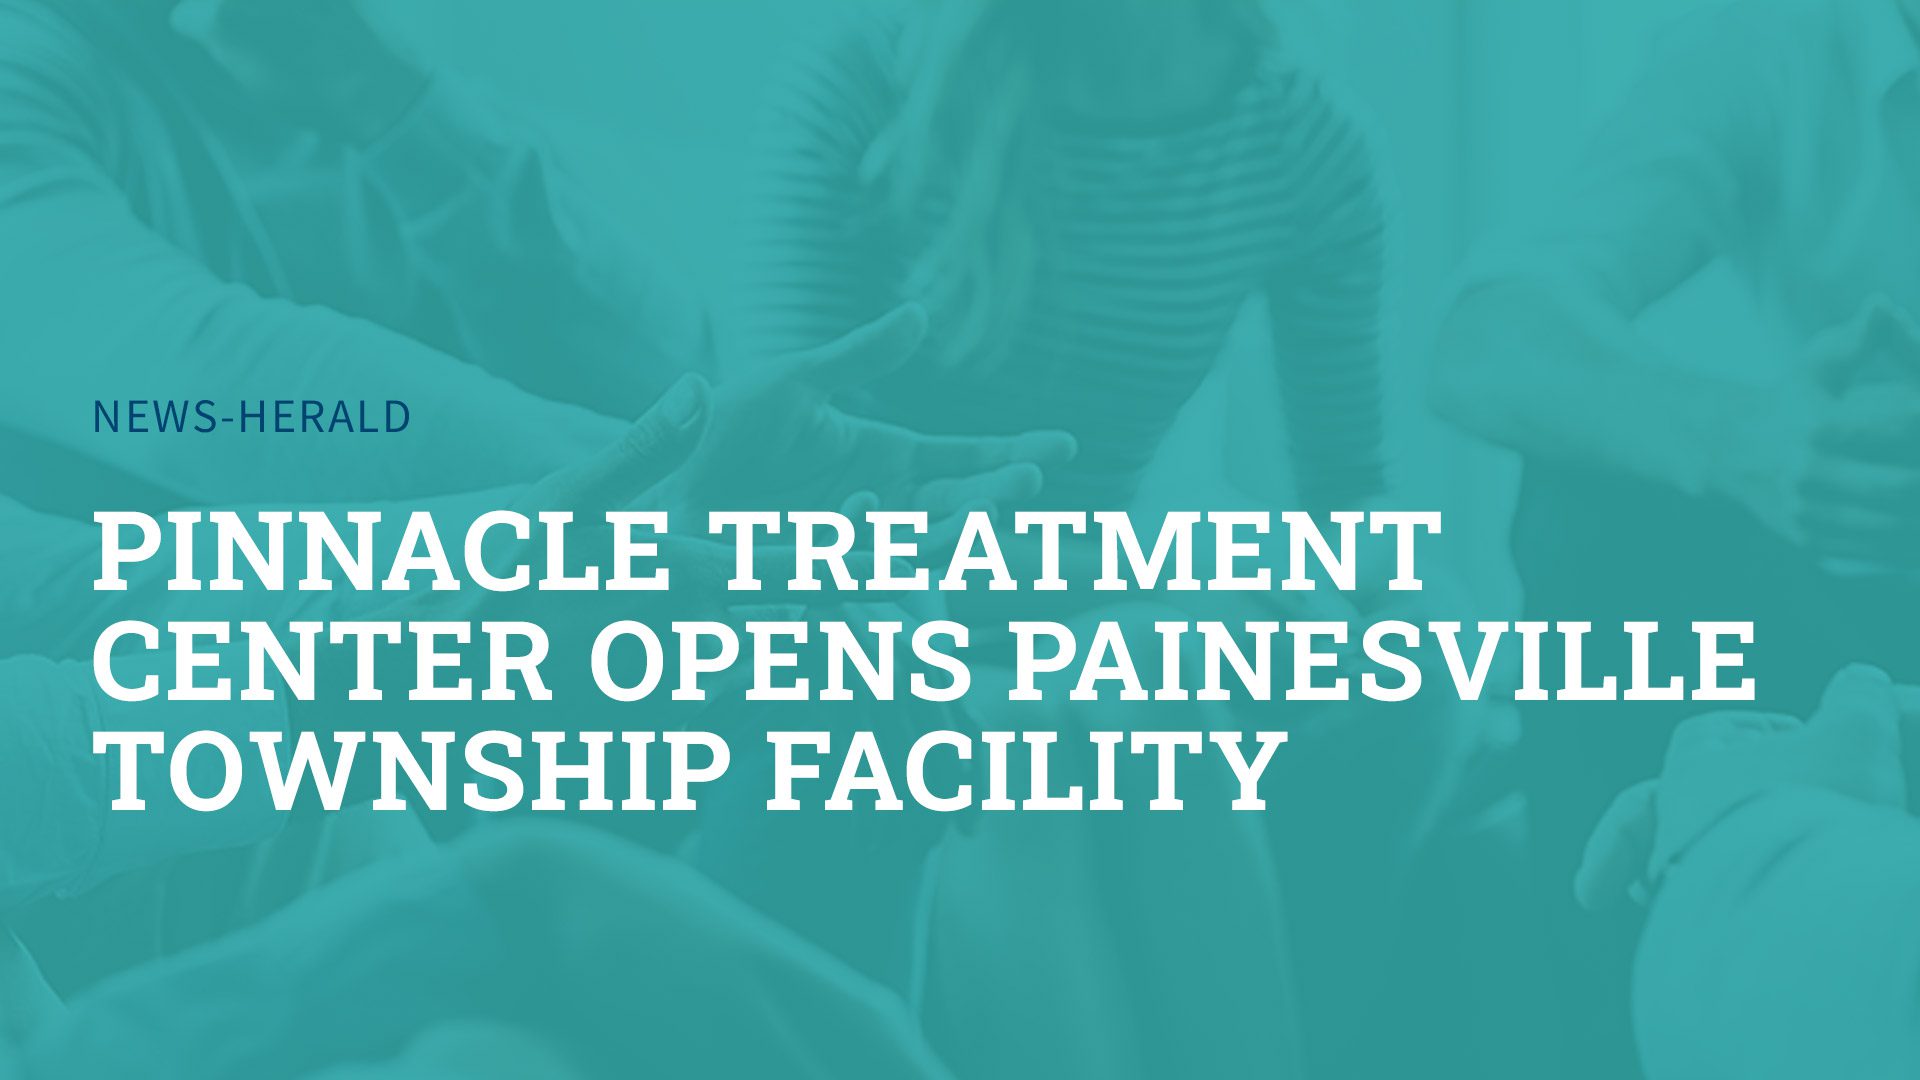 Pinnacle Treatment Center opens Painesville Township facility